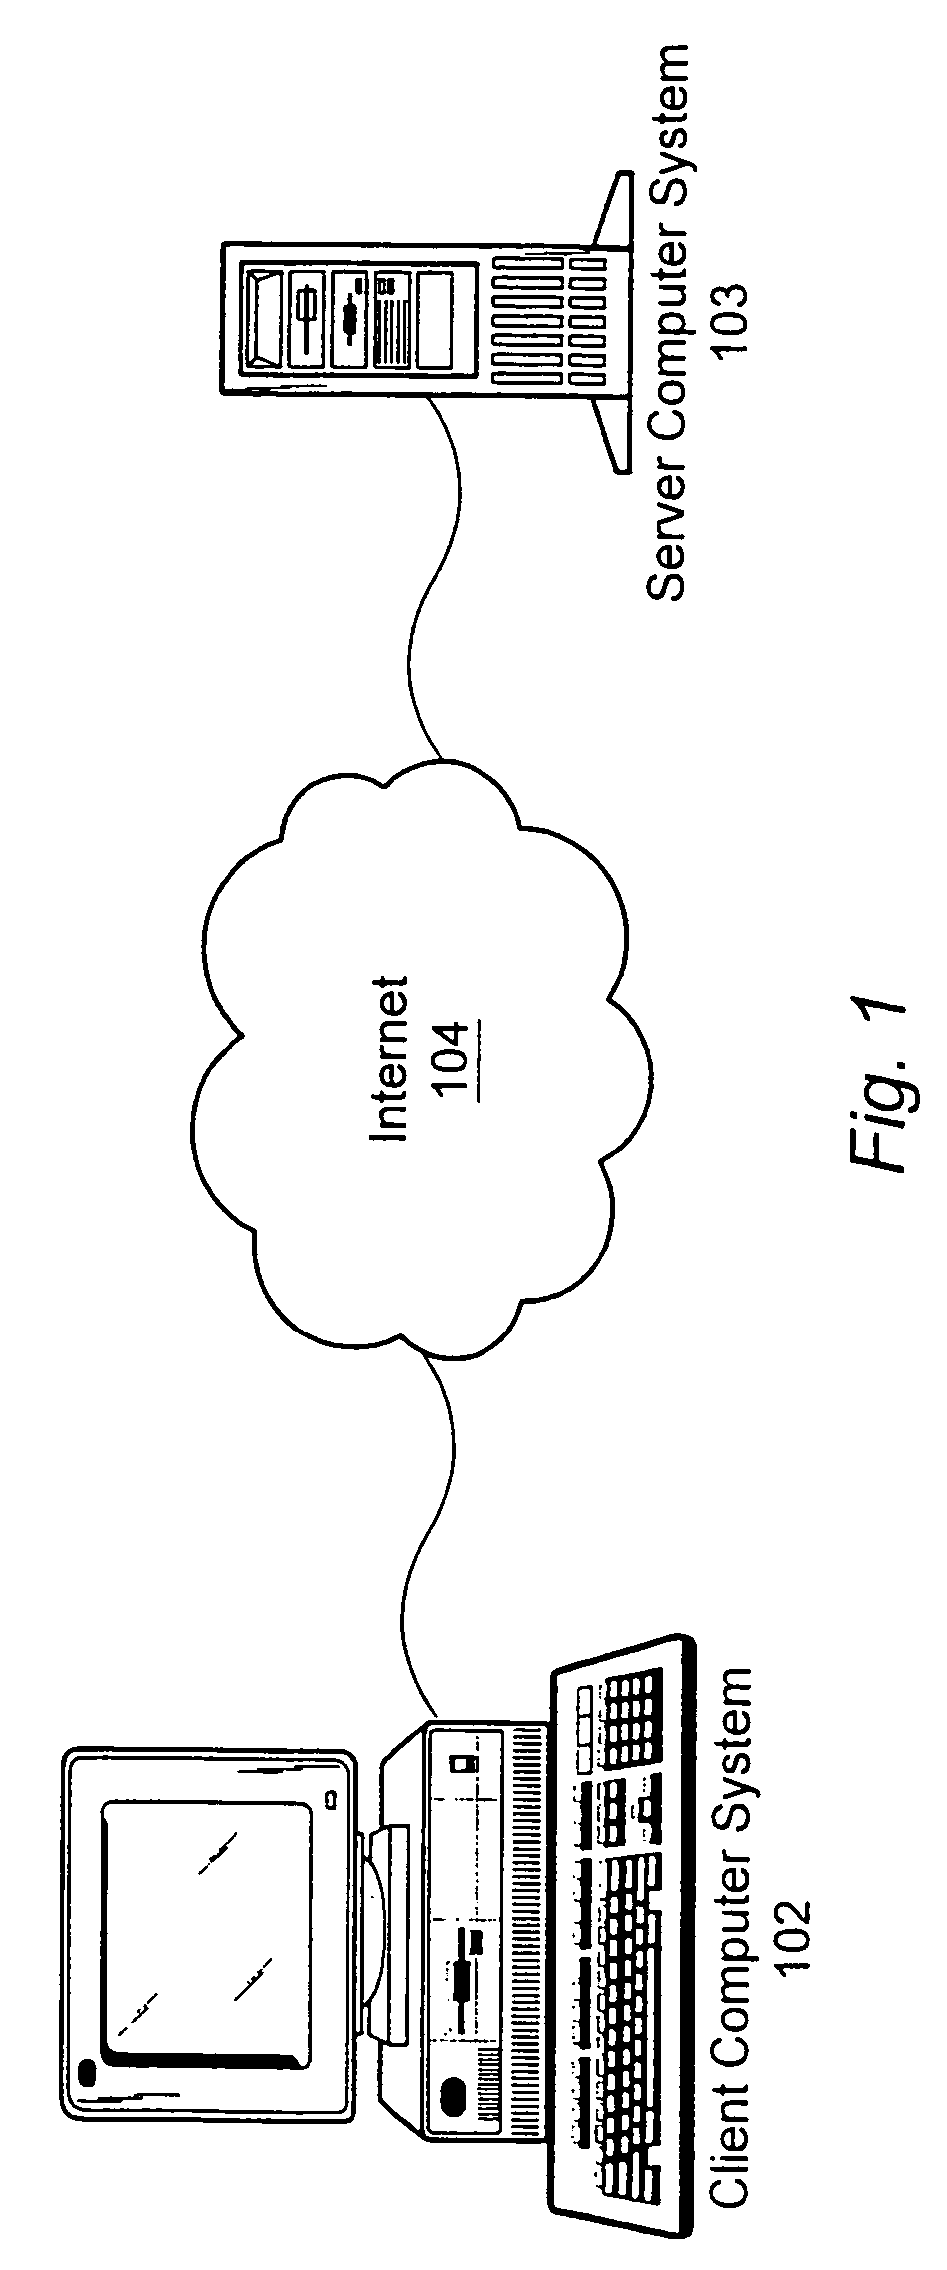 Network-based system for configuring a programmable hardware element in a modeling system using hardware configuration programs determined based on a user specification